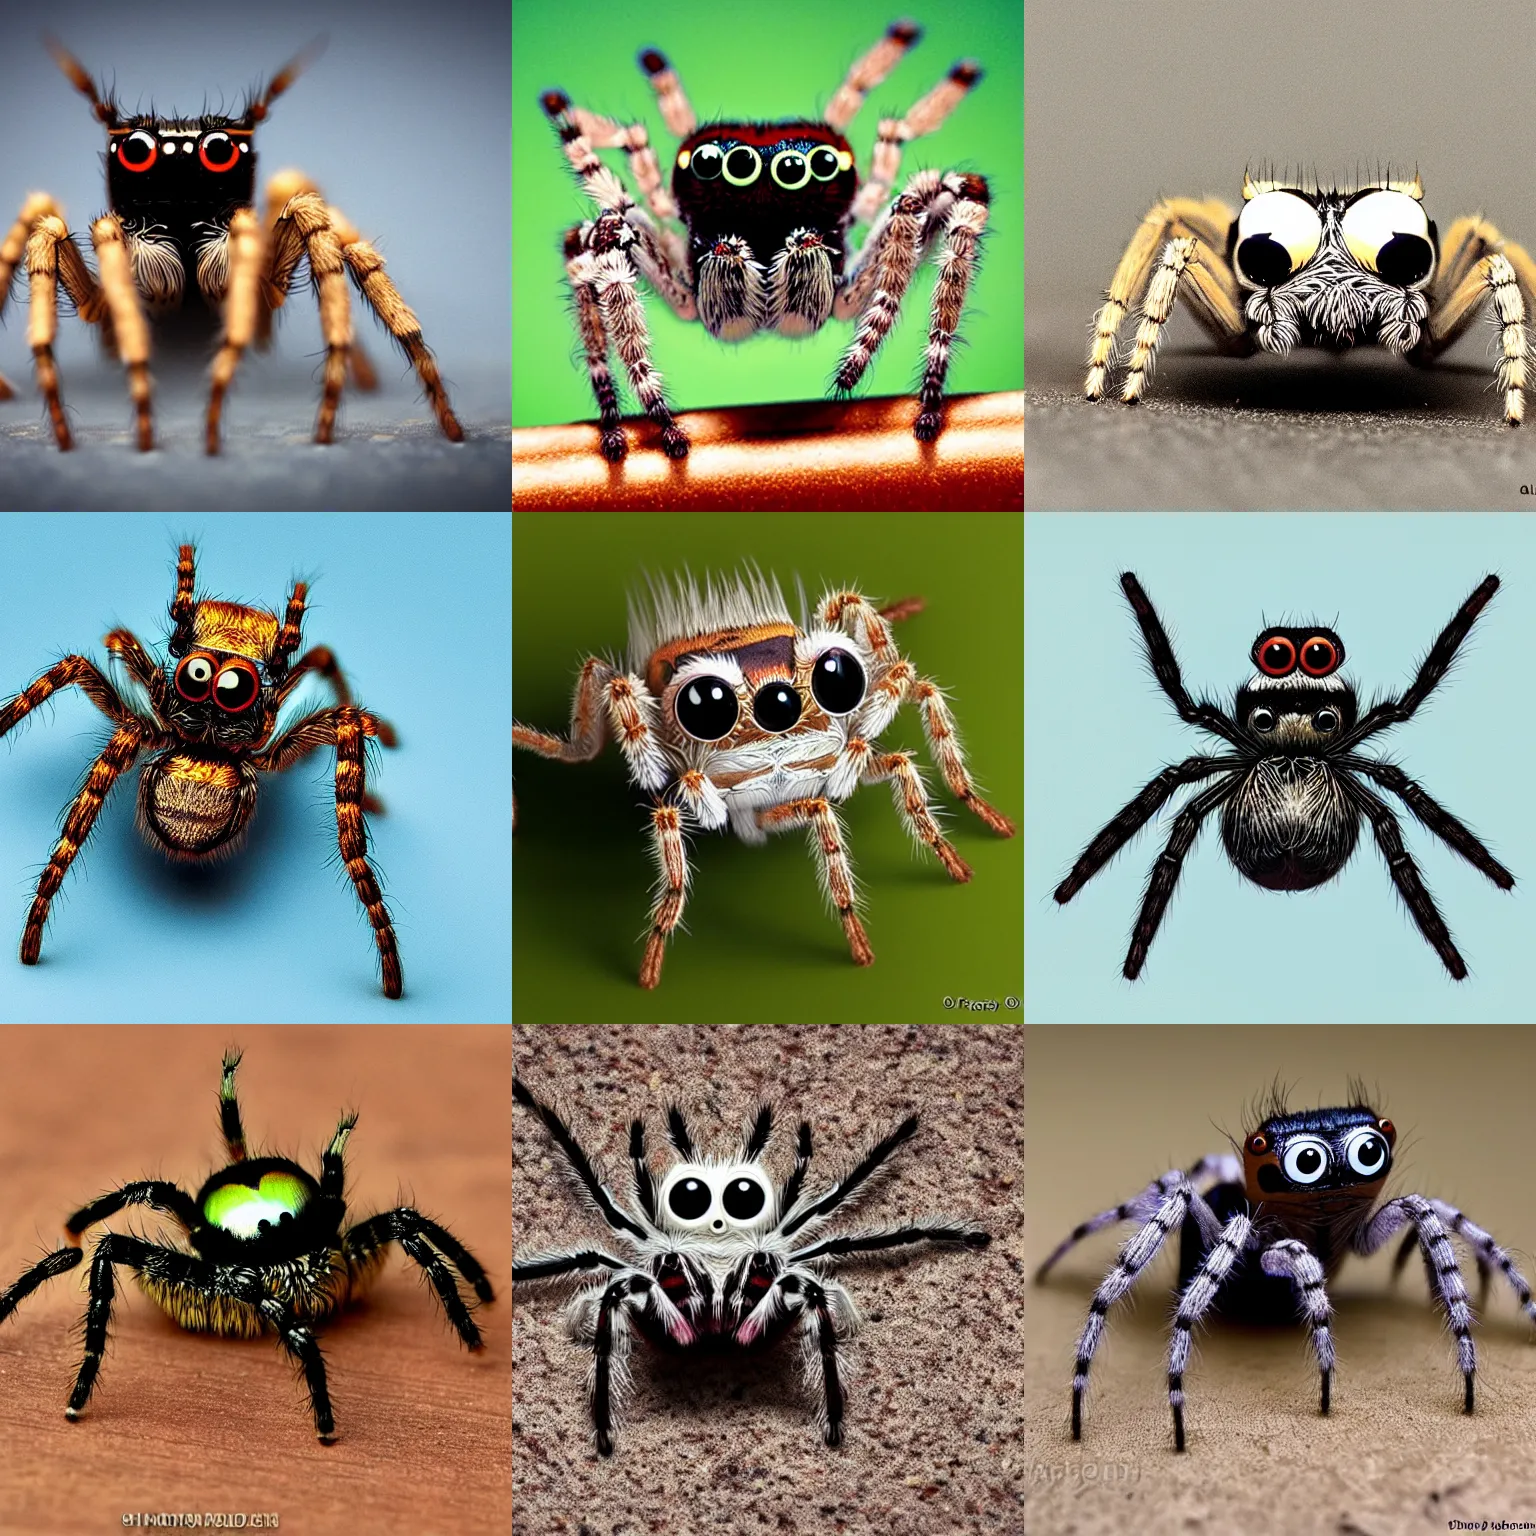 Prompt: a cute jumping spider, by pixar